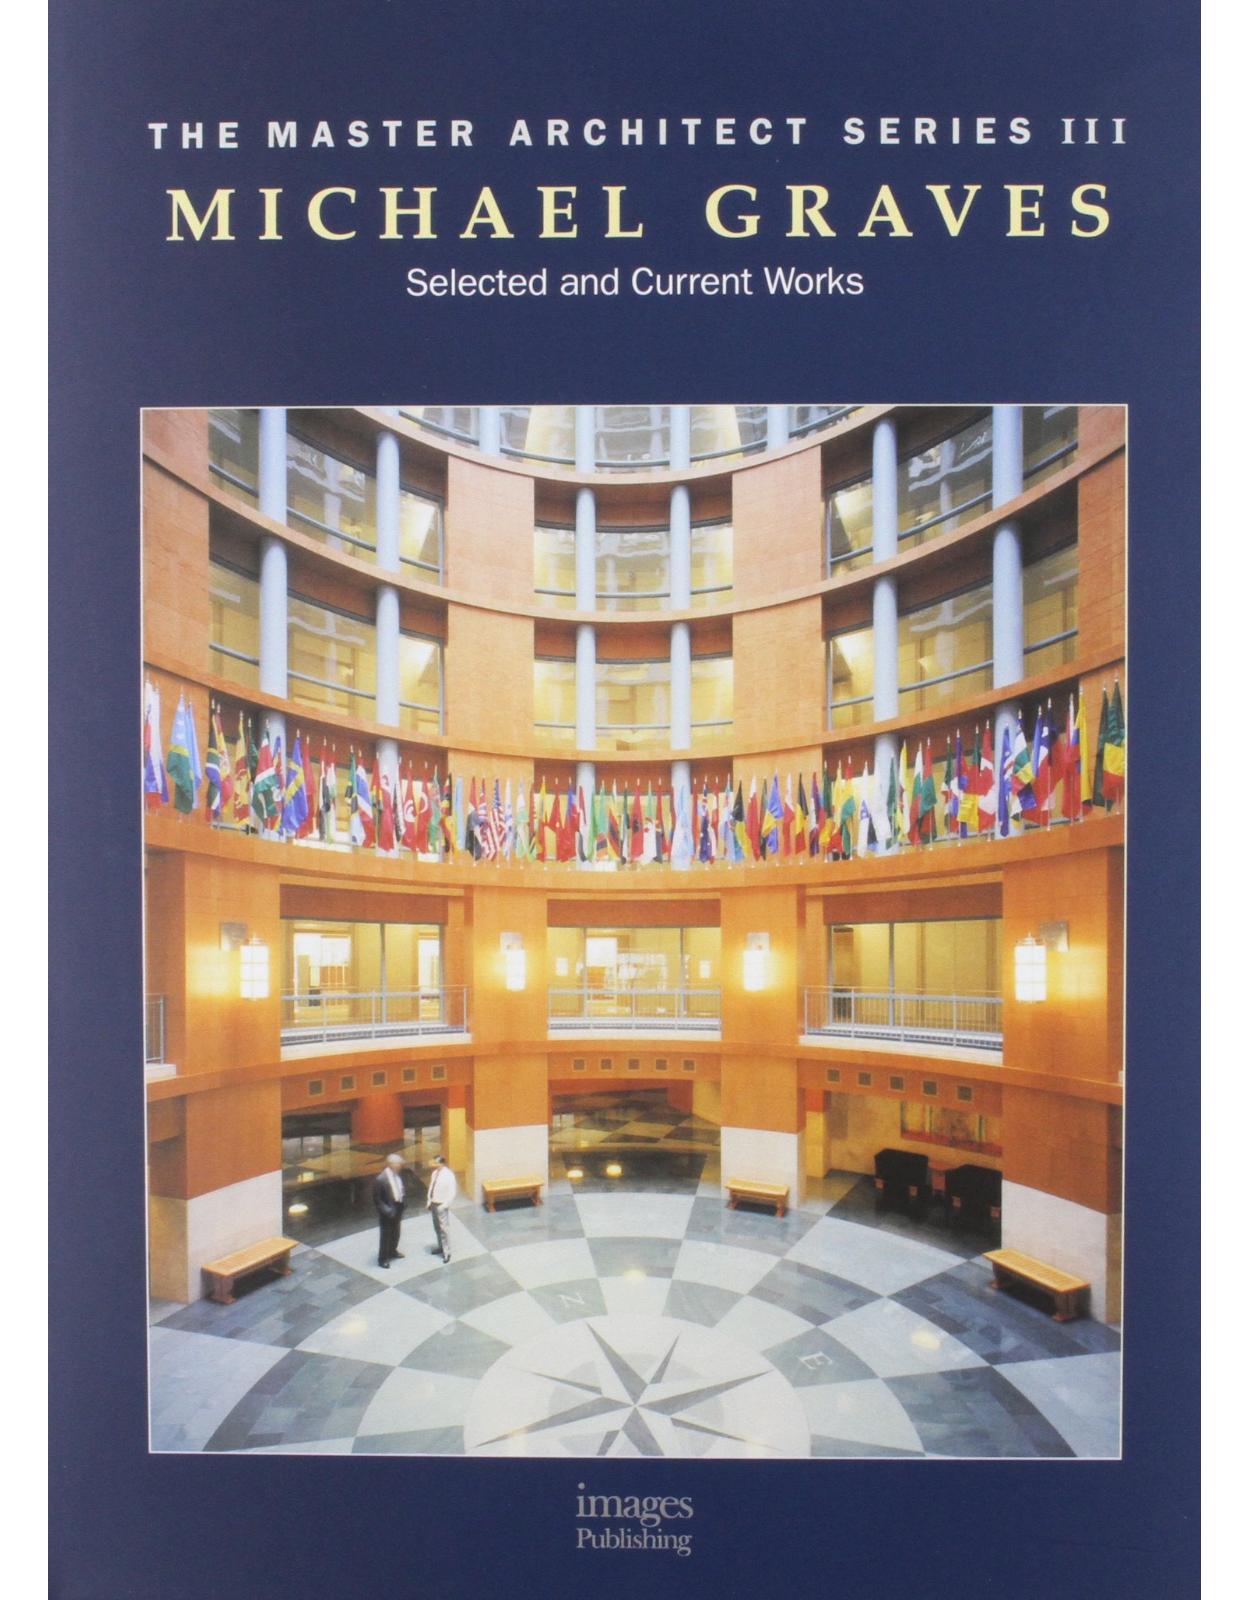 Michael Graves: Selected and Current Works (Master Architect Series III)